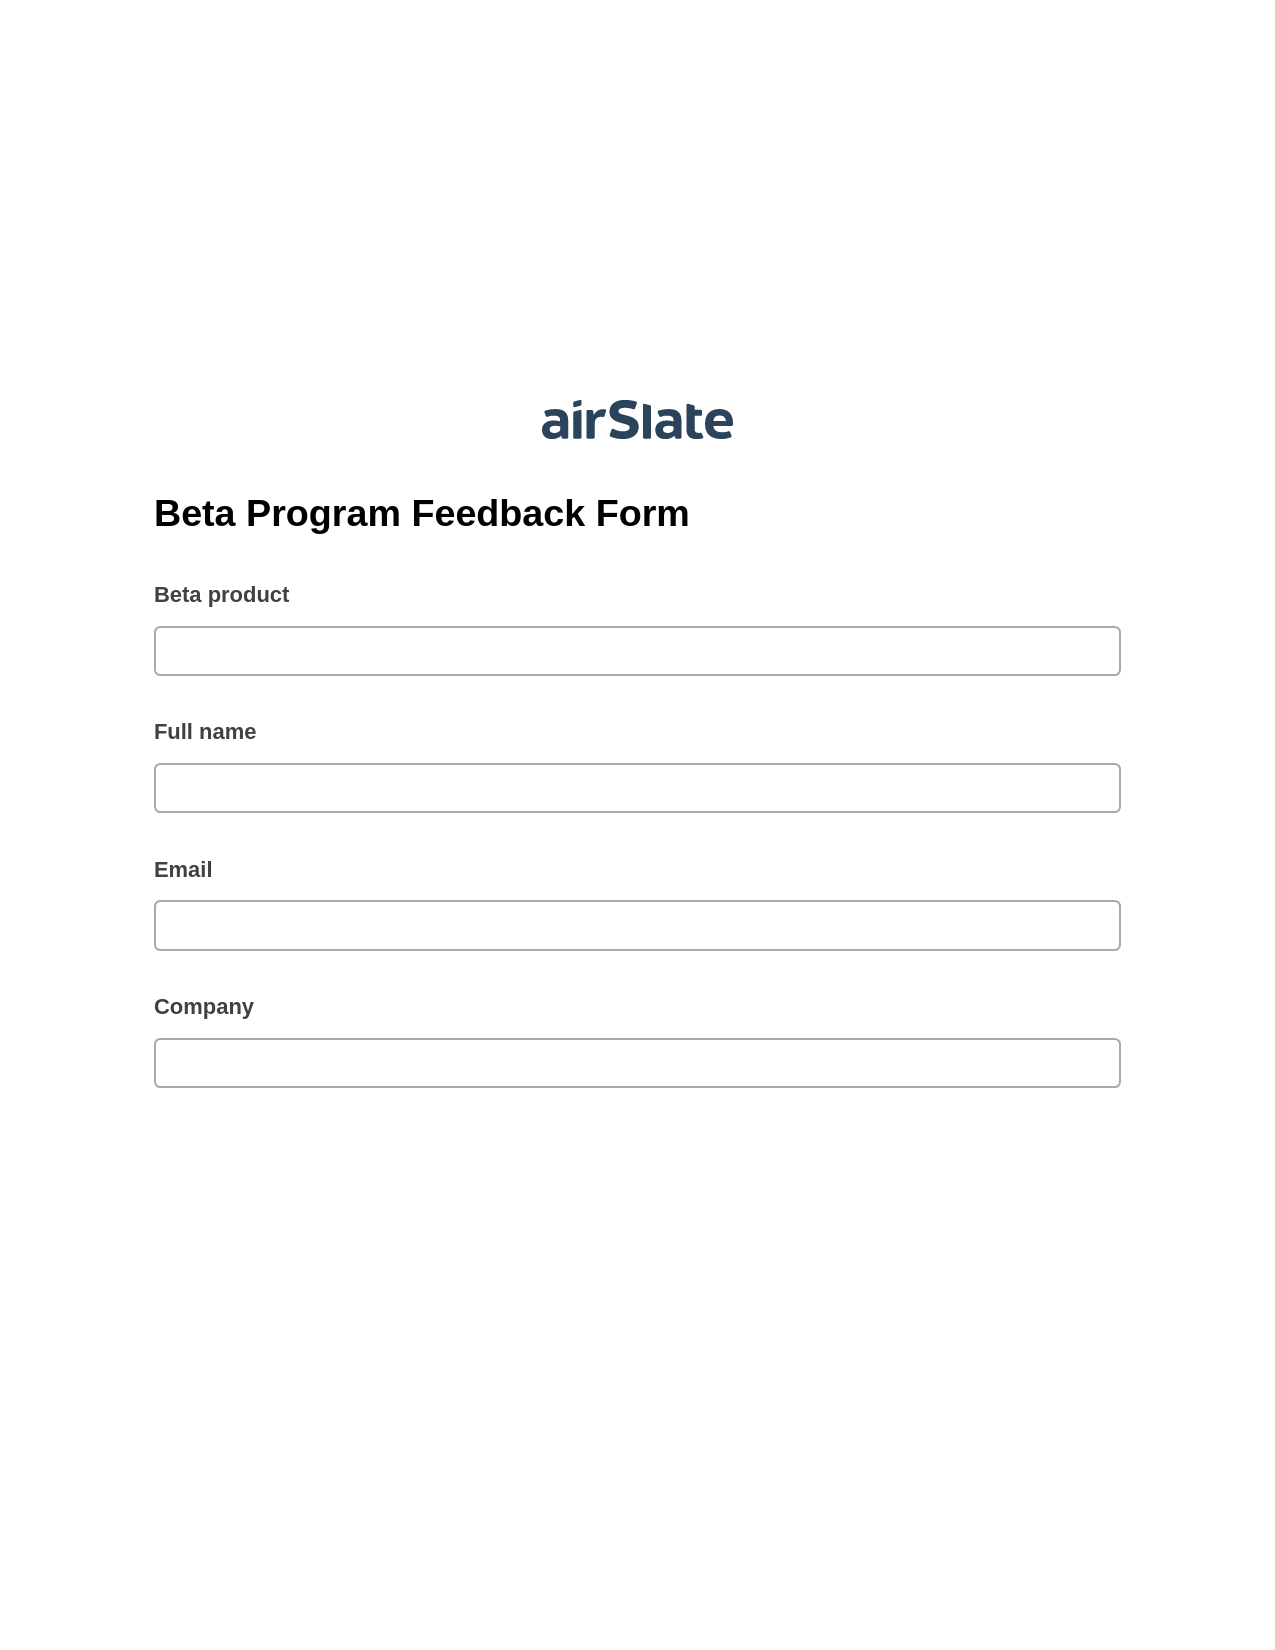 Multirole Beta Program Feedback Form Pre-fill from another Slate Bot, Email Notification Bot, Export to Excel 365 Bot